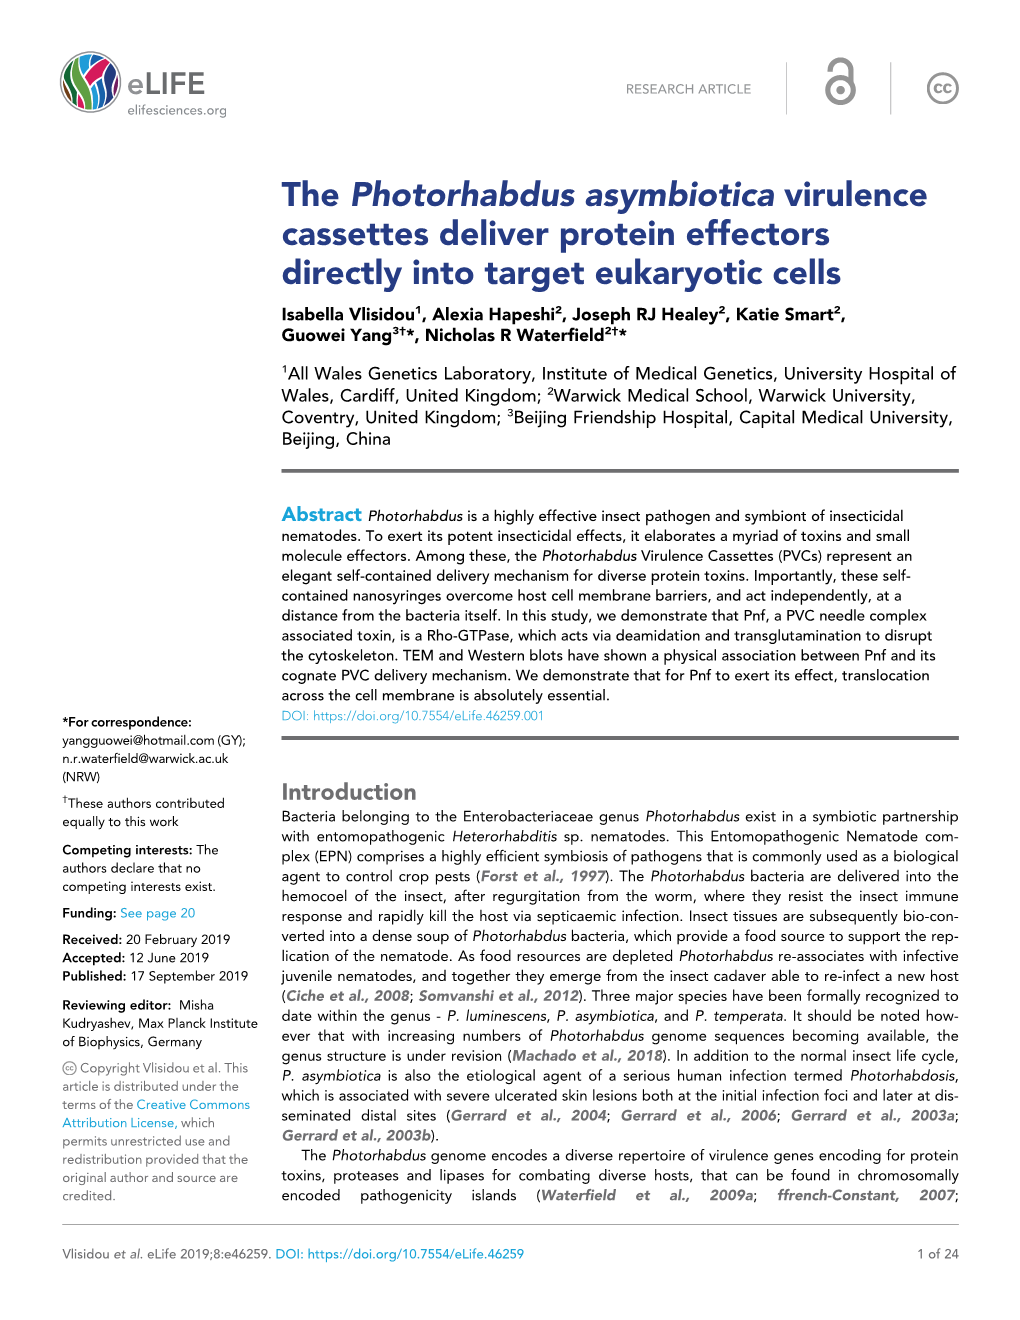 The Photorhabdus Asymbiotica Virulence Cassettes Deliver Protein